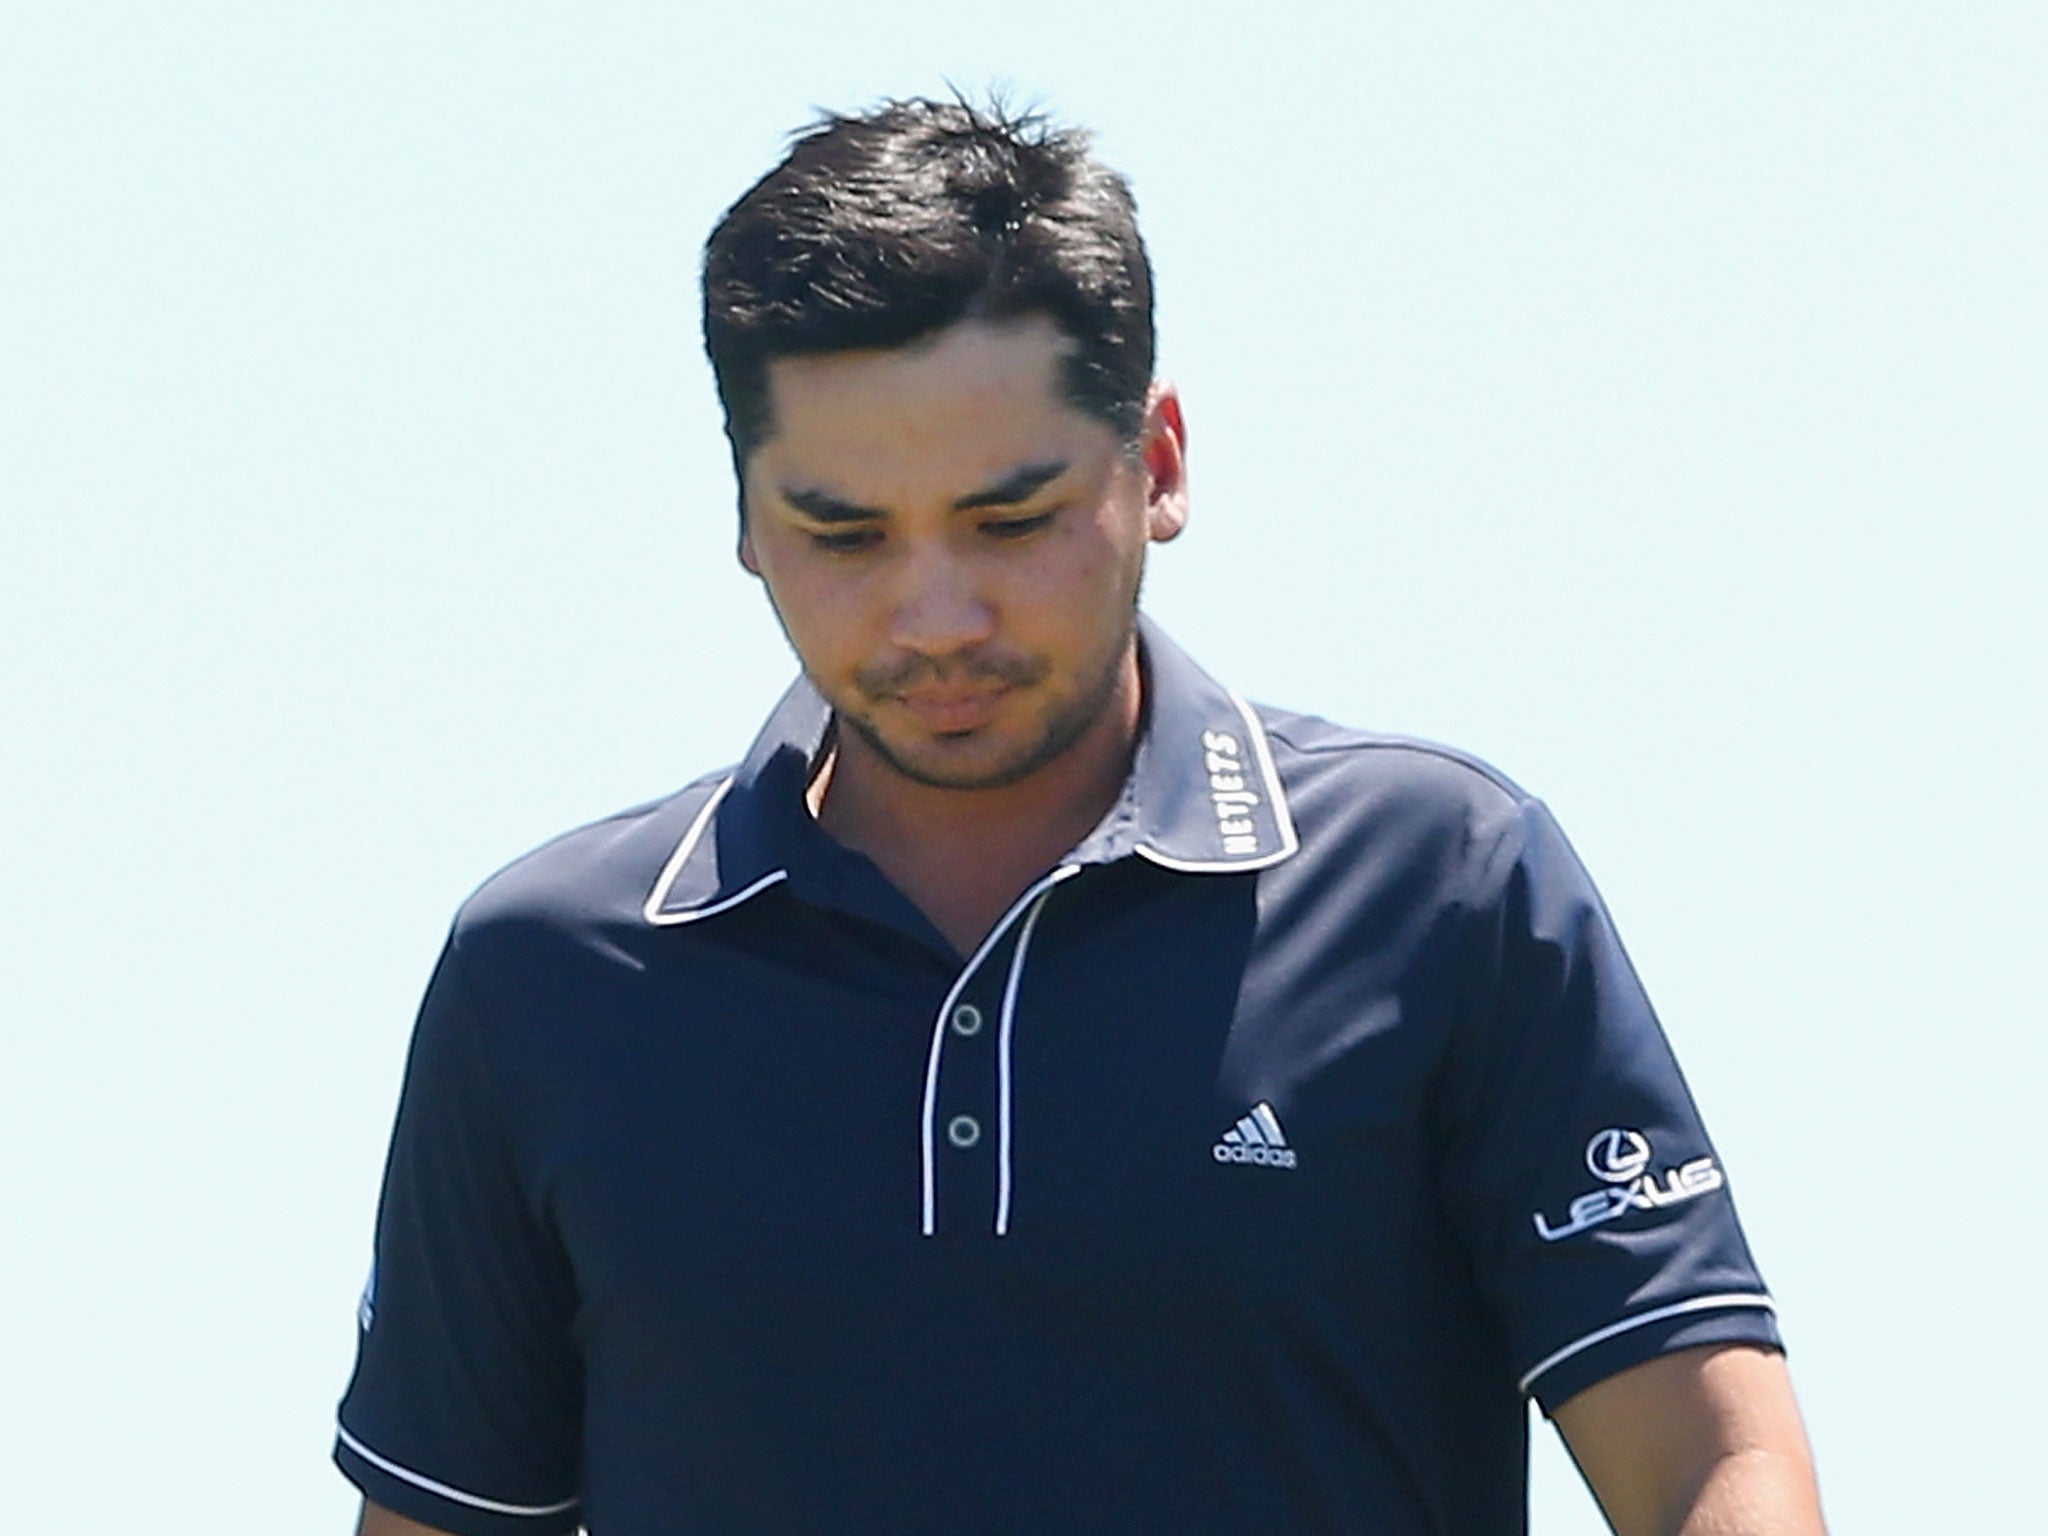 Jason Day has suffered tragedy from the Philippines typhoon